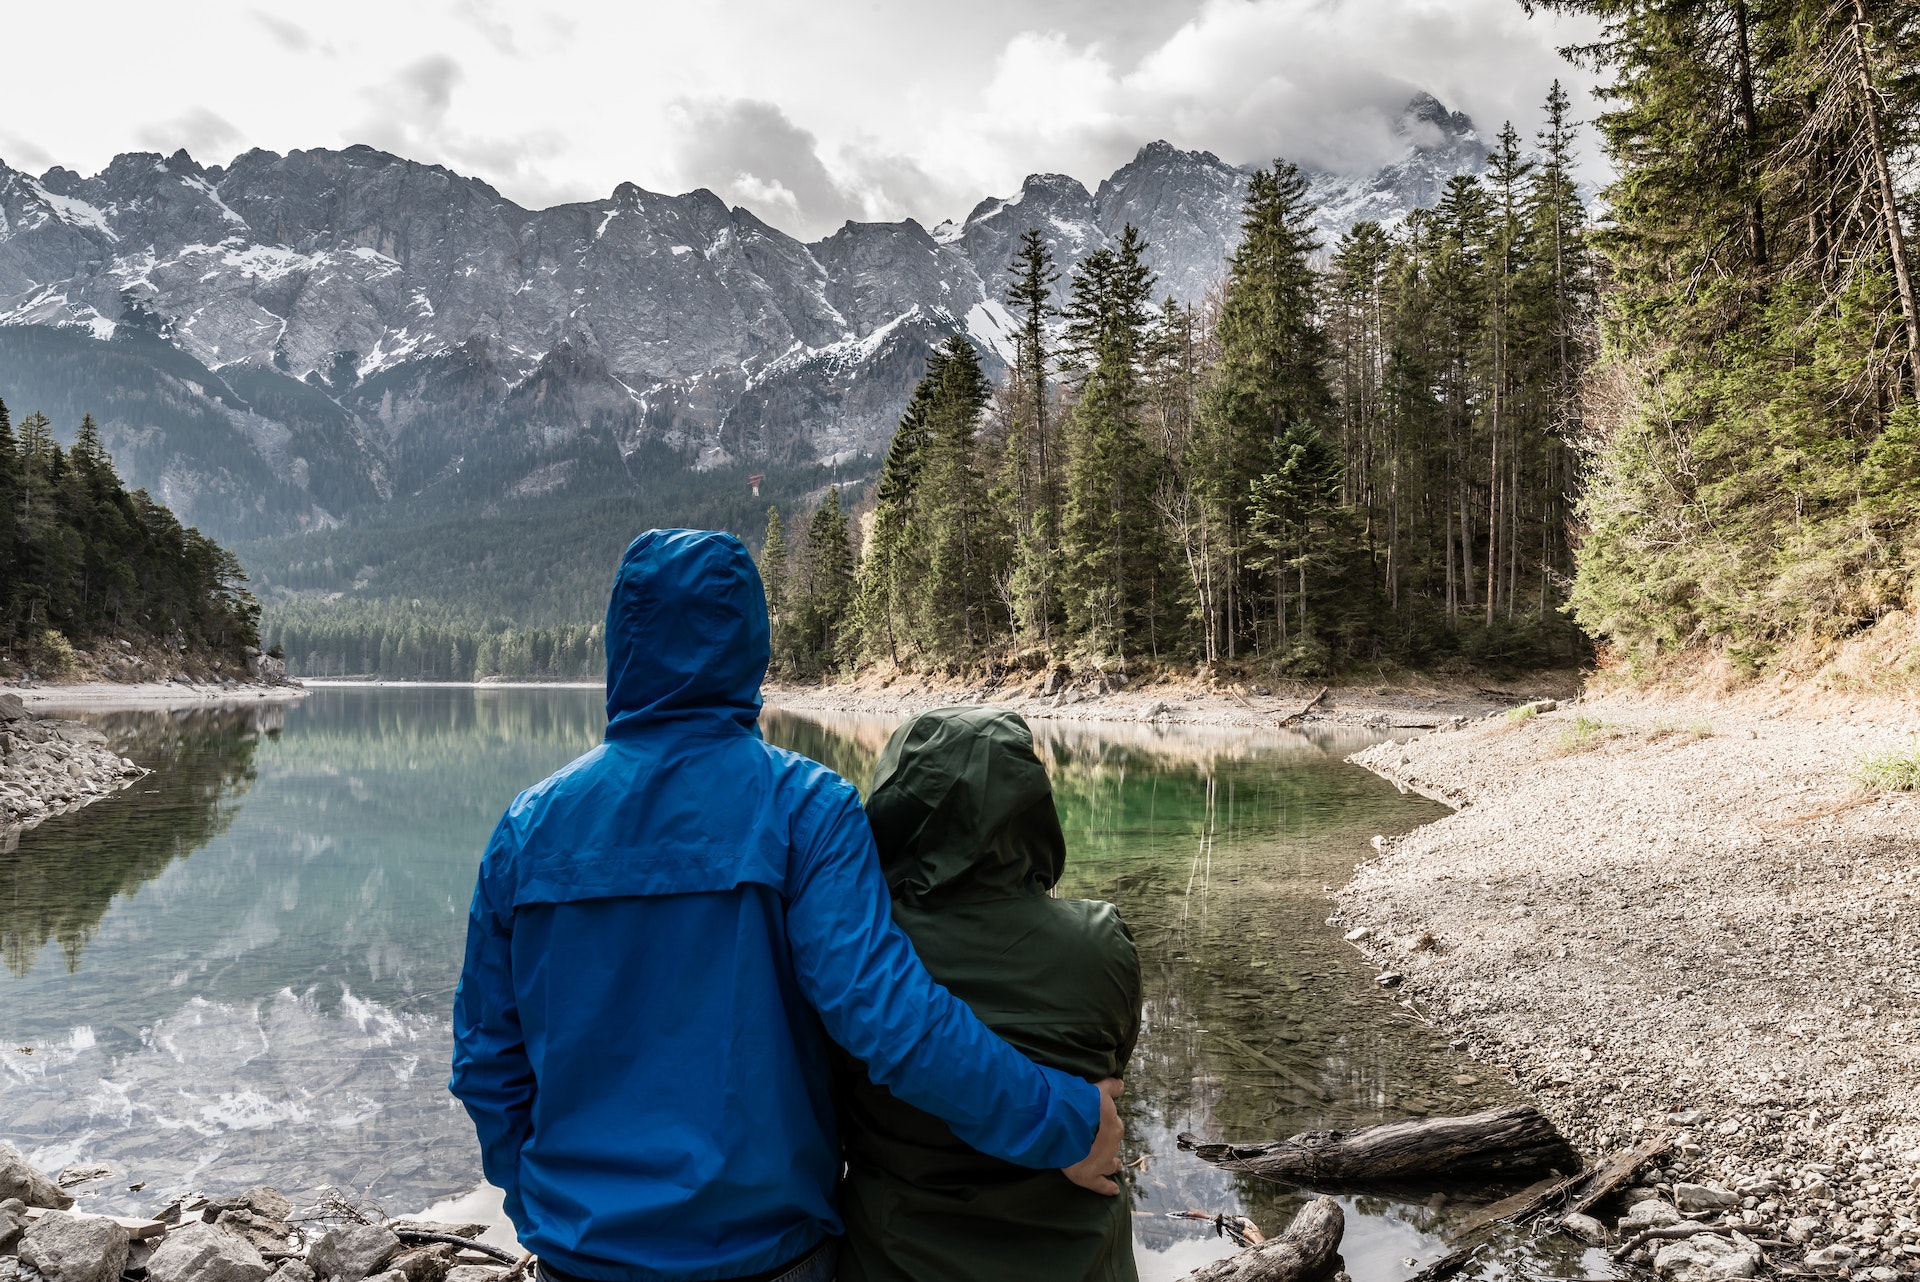 A couple standing near a lake | Source: Pexels